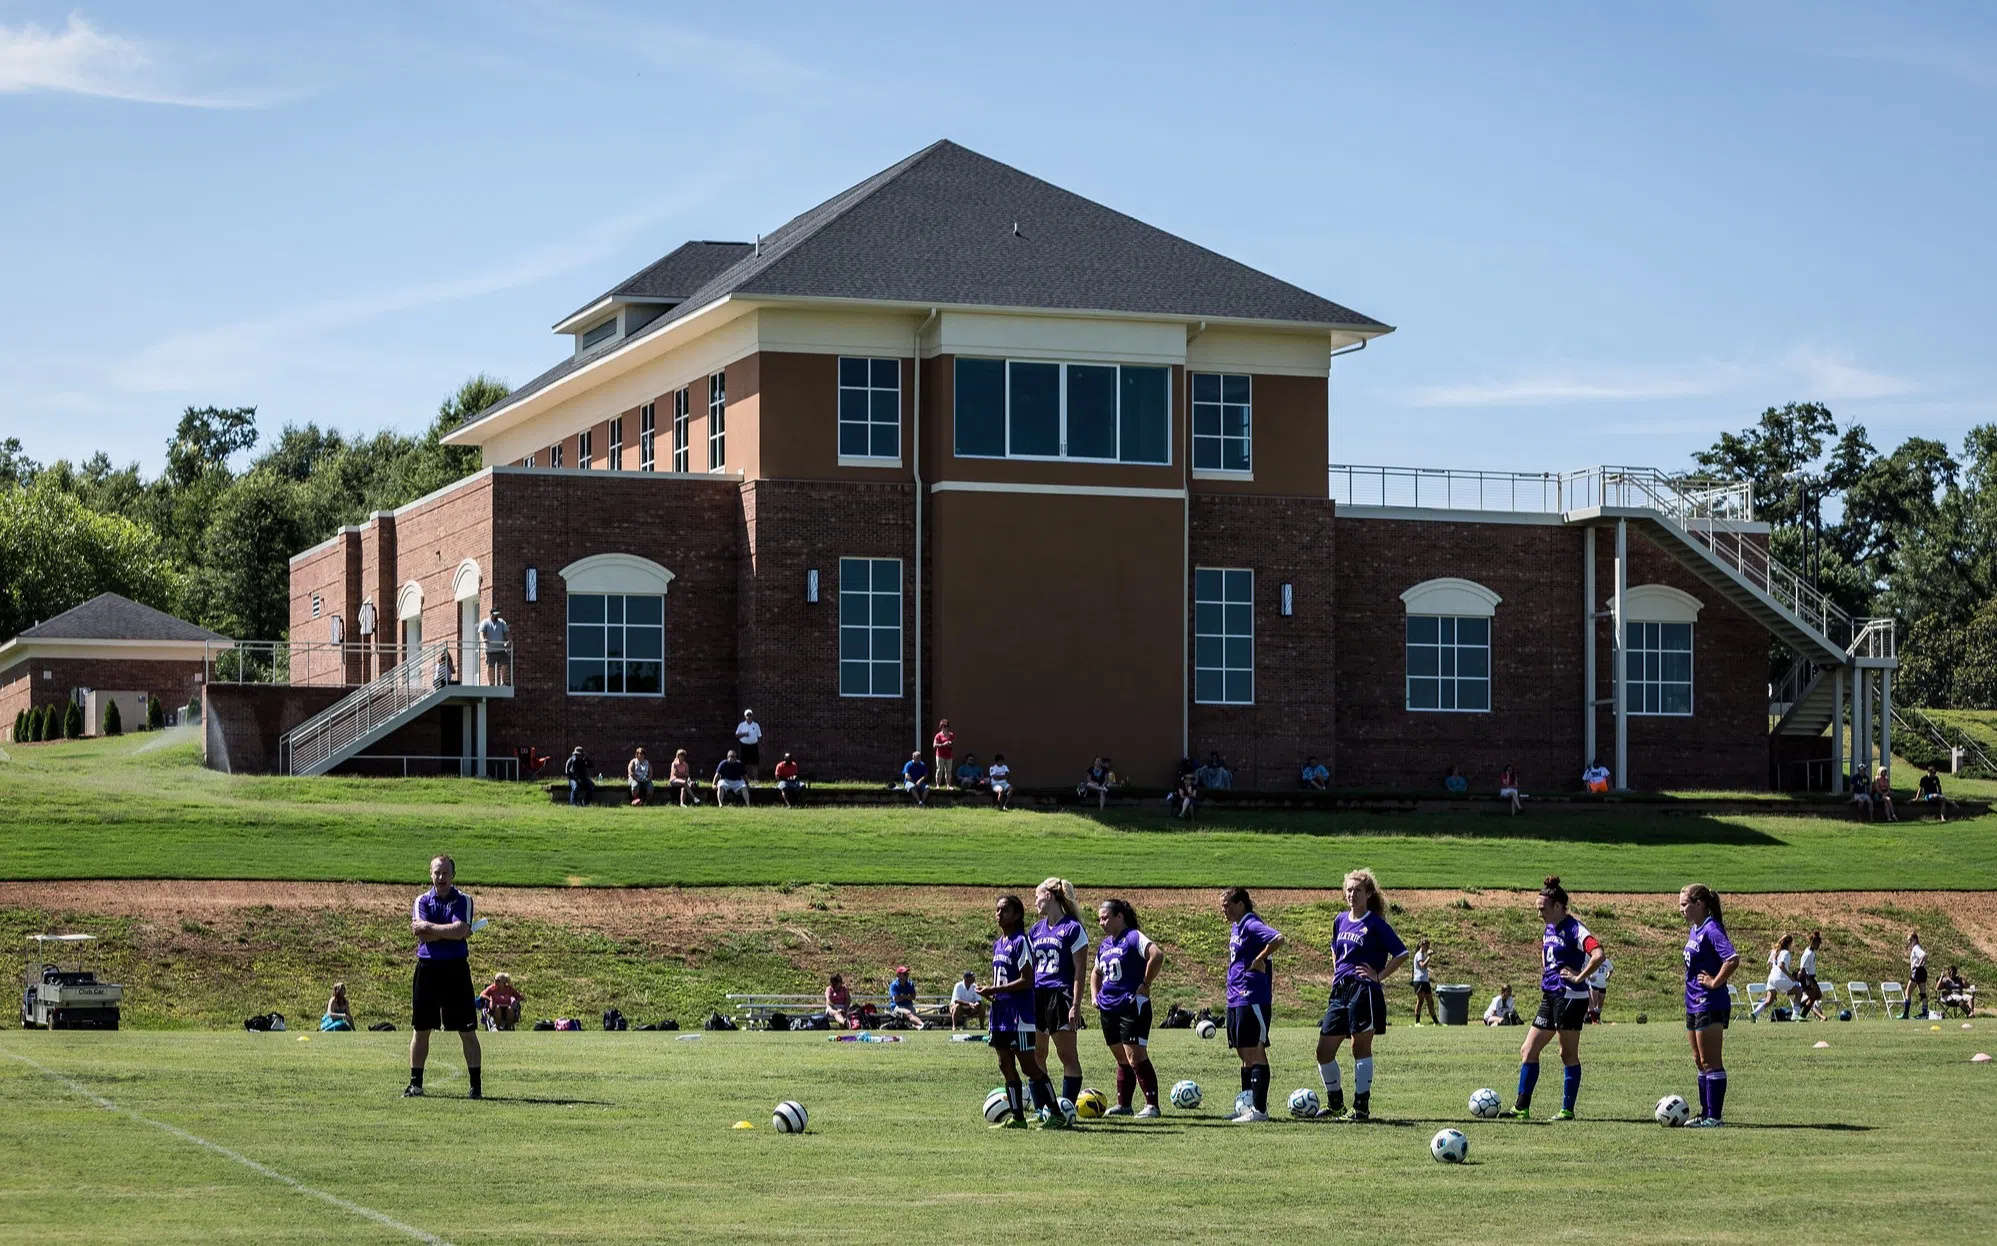 A wide brick building sits in the distance atop a green space filled with soccer players in purple jerseys.